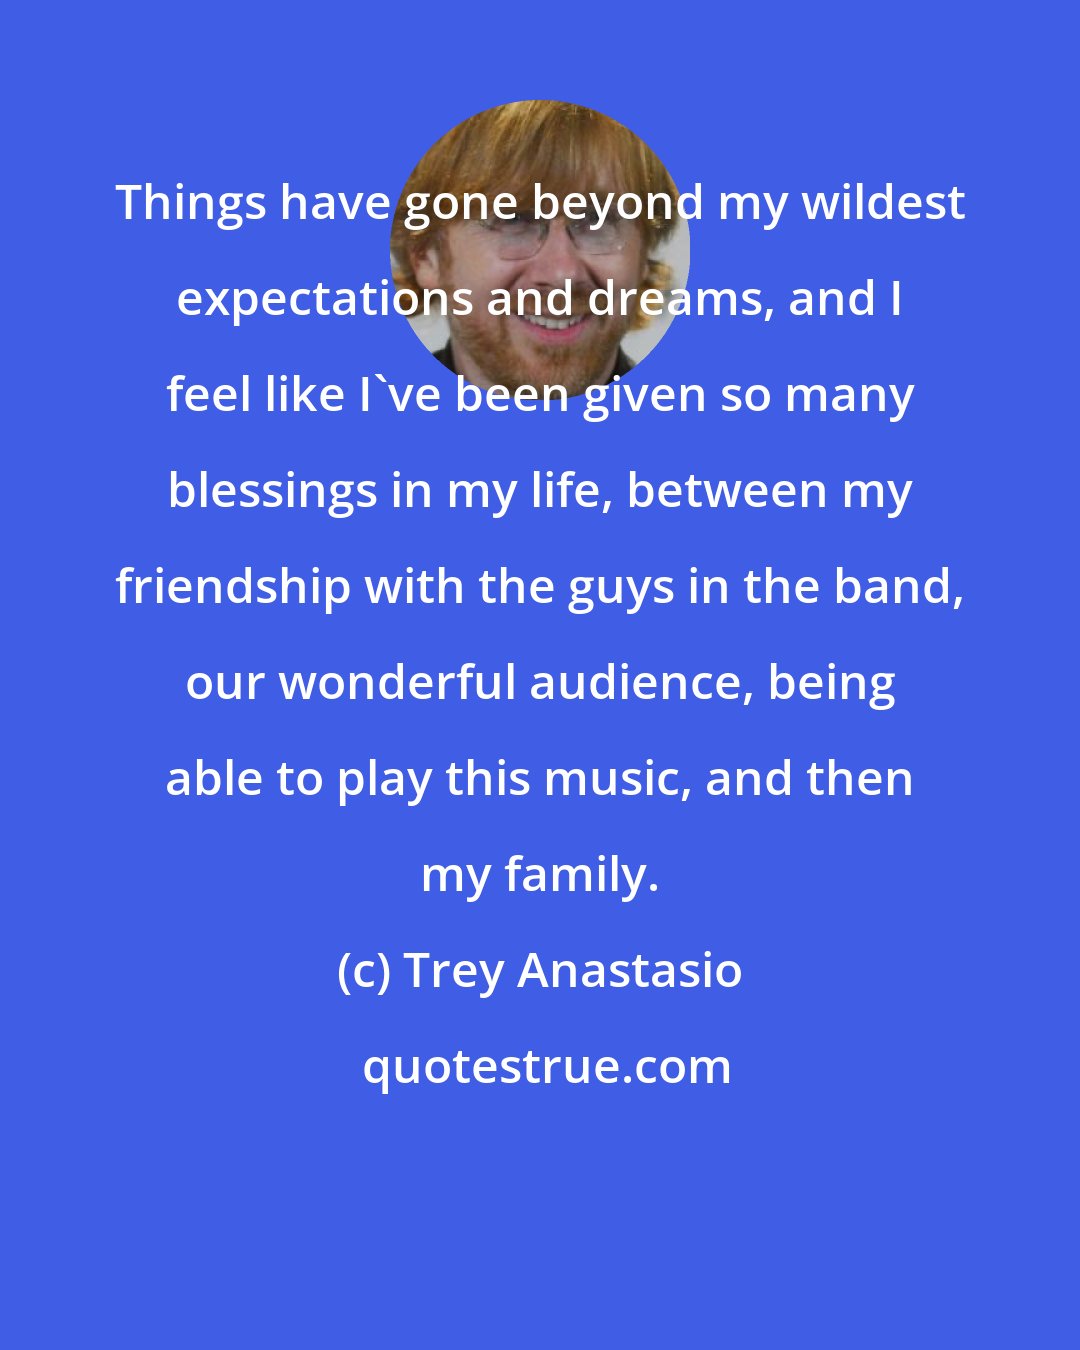 Trey Anastasio: Things have gone beyond my wildest expectations and dreams, and I feel like I've been given so many blessings in my life, between my friendship with the guys in the band, our wonderful audience, being able to play this music, and then my family.